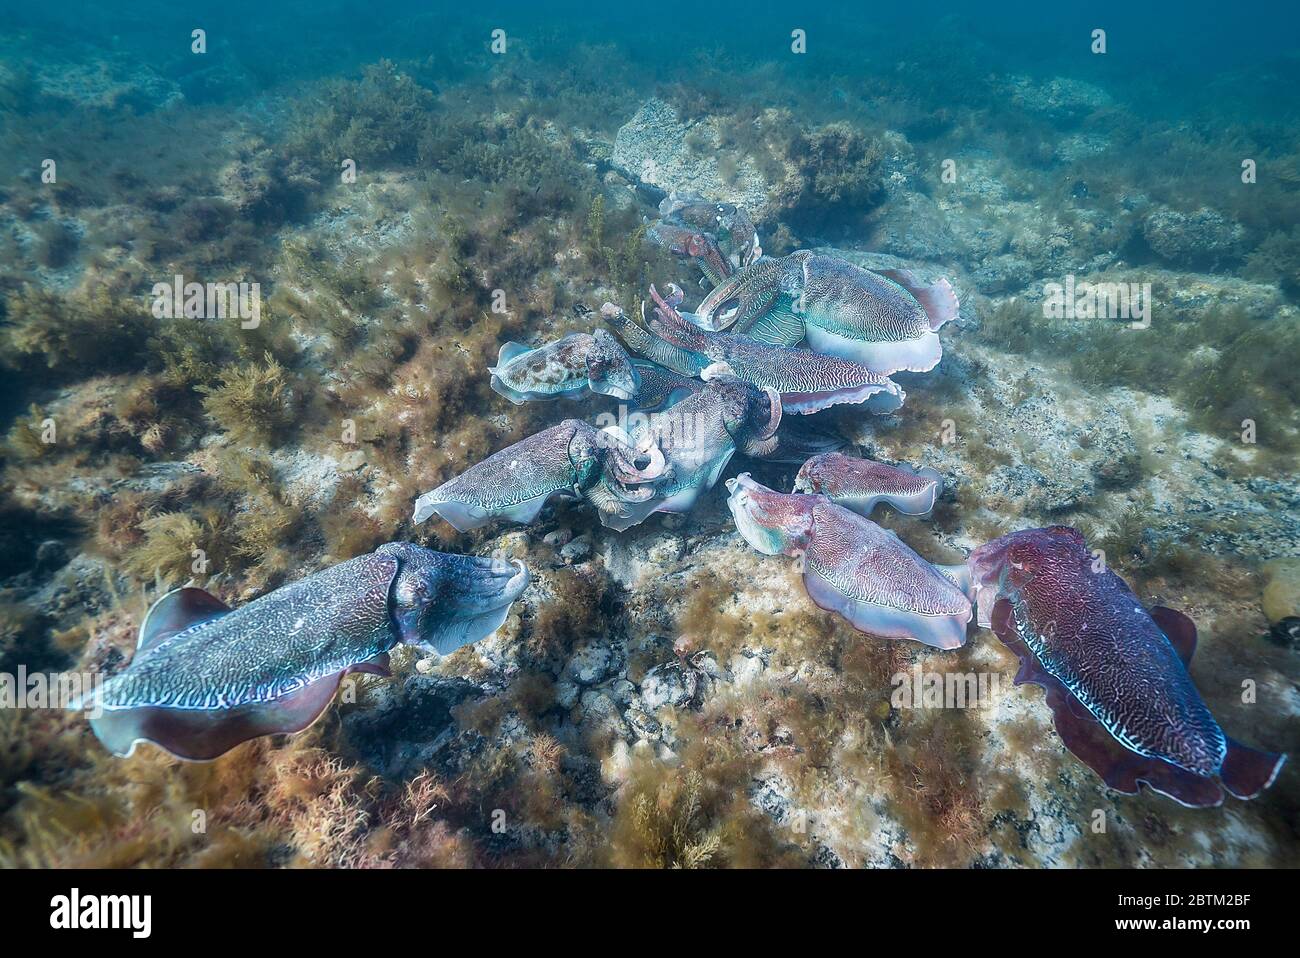 Male giant cuttlefish competing to mate with a female, Point Lowly, South Australia. Stock Photo